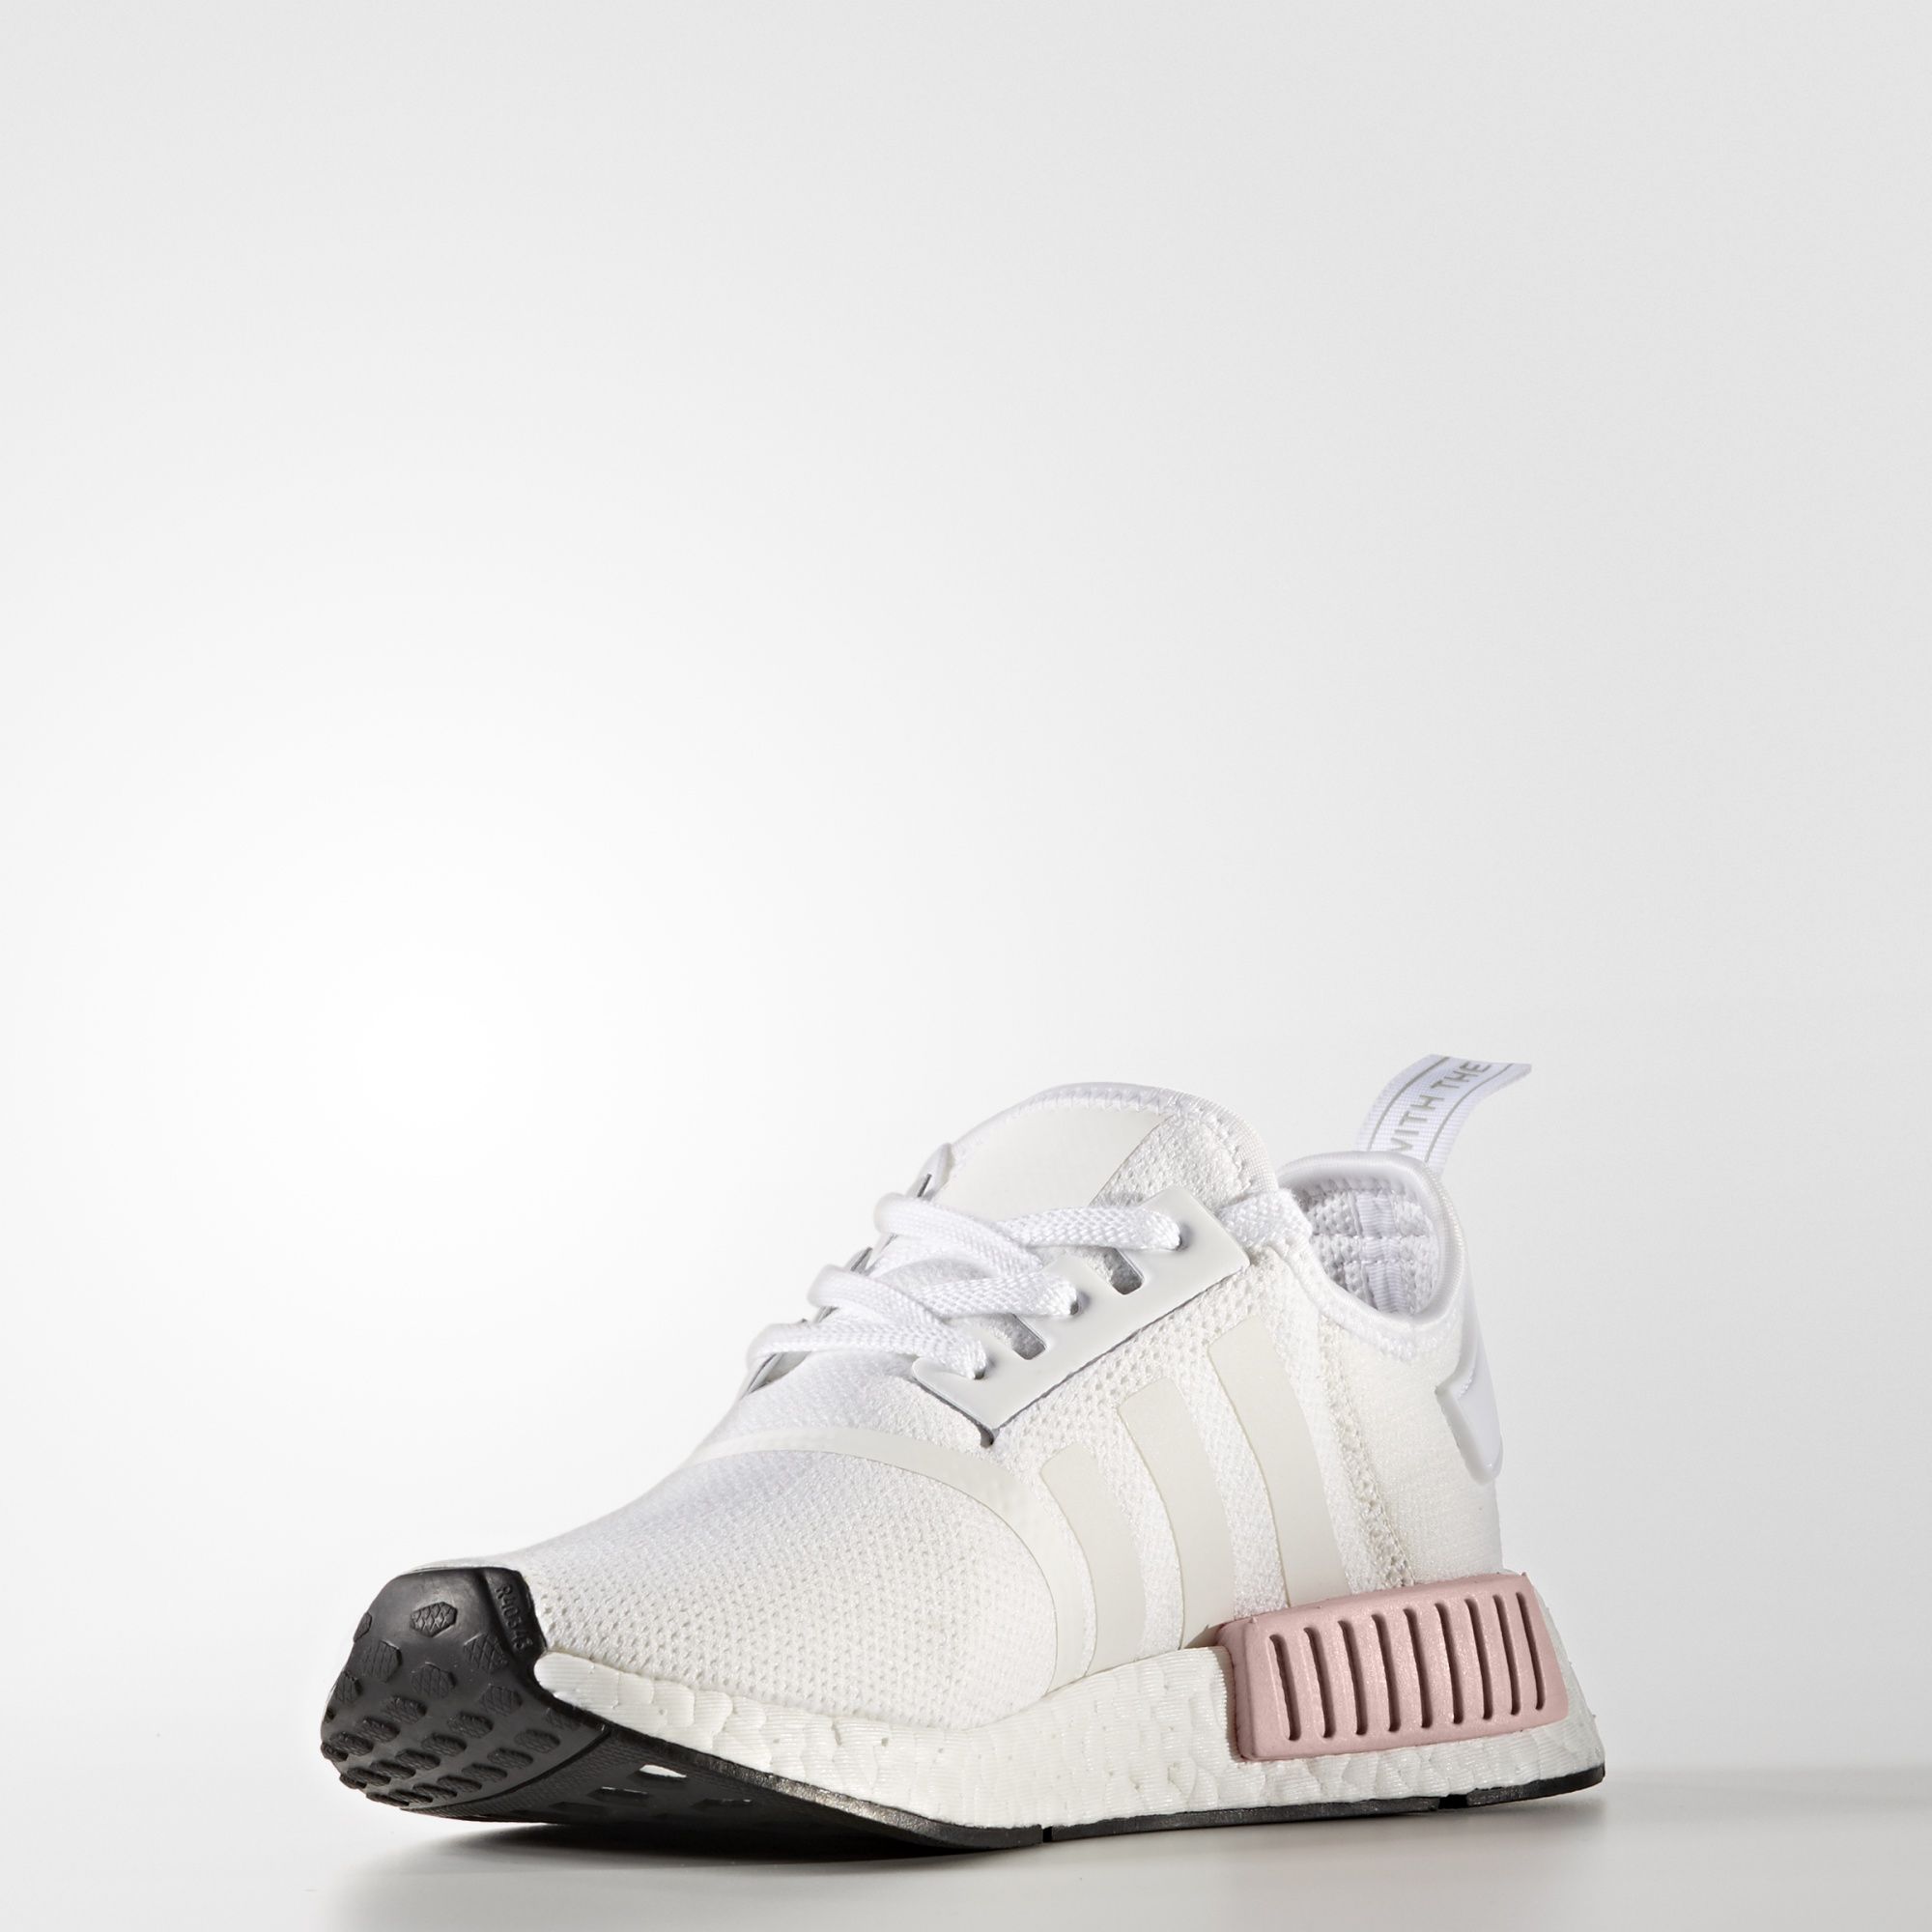 adidas-wmns-nmd_r1-white-icey-pink-3